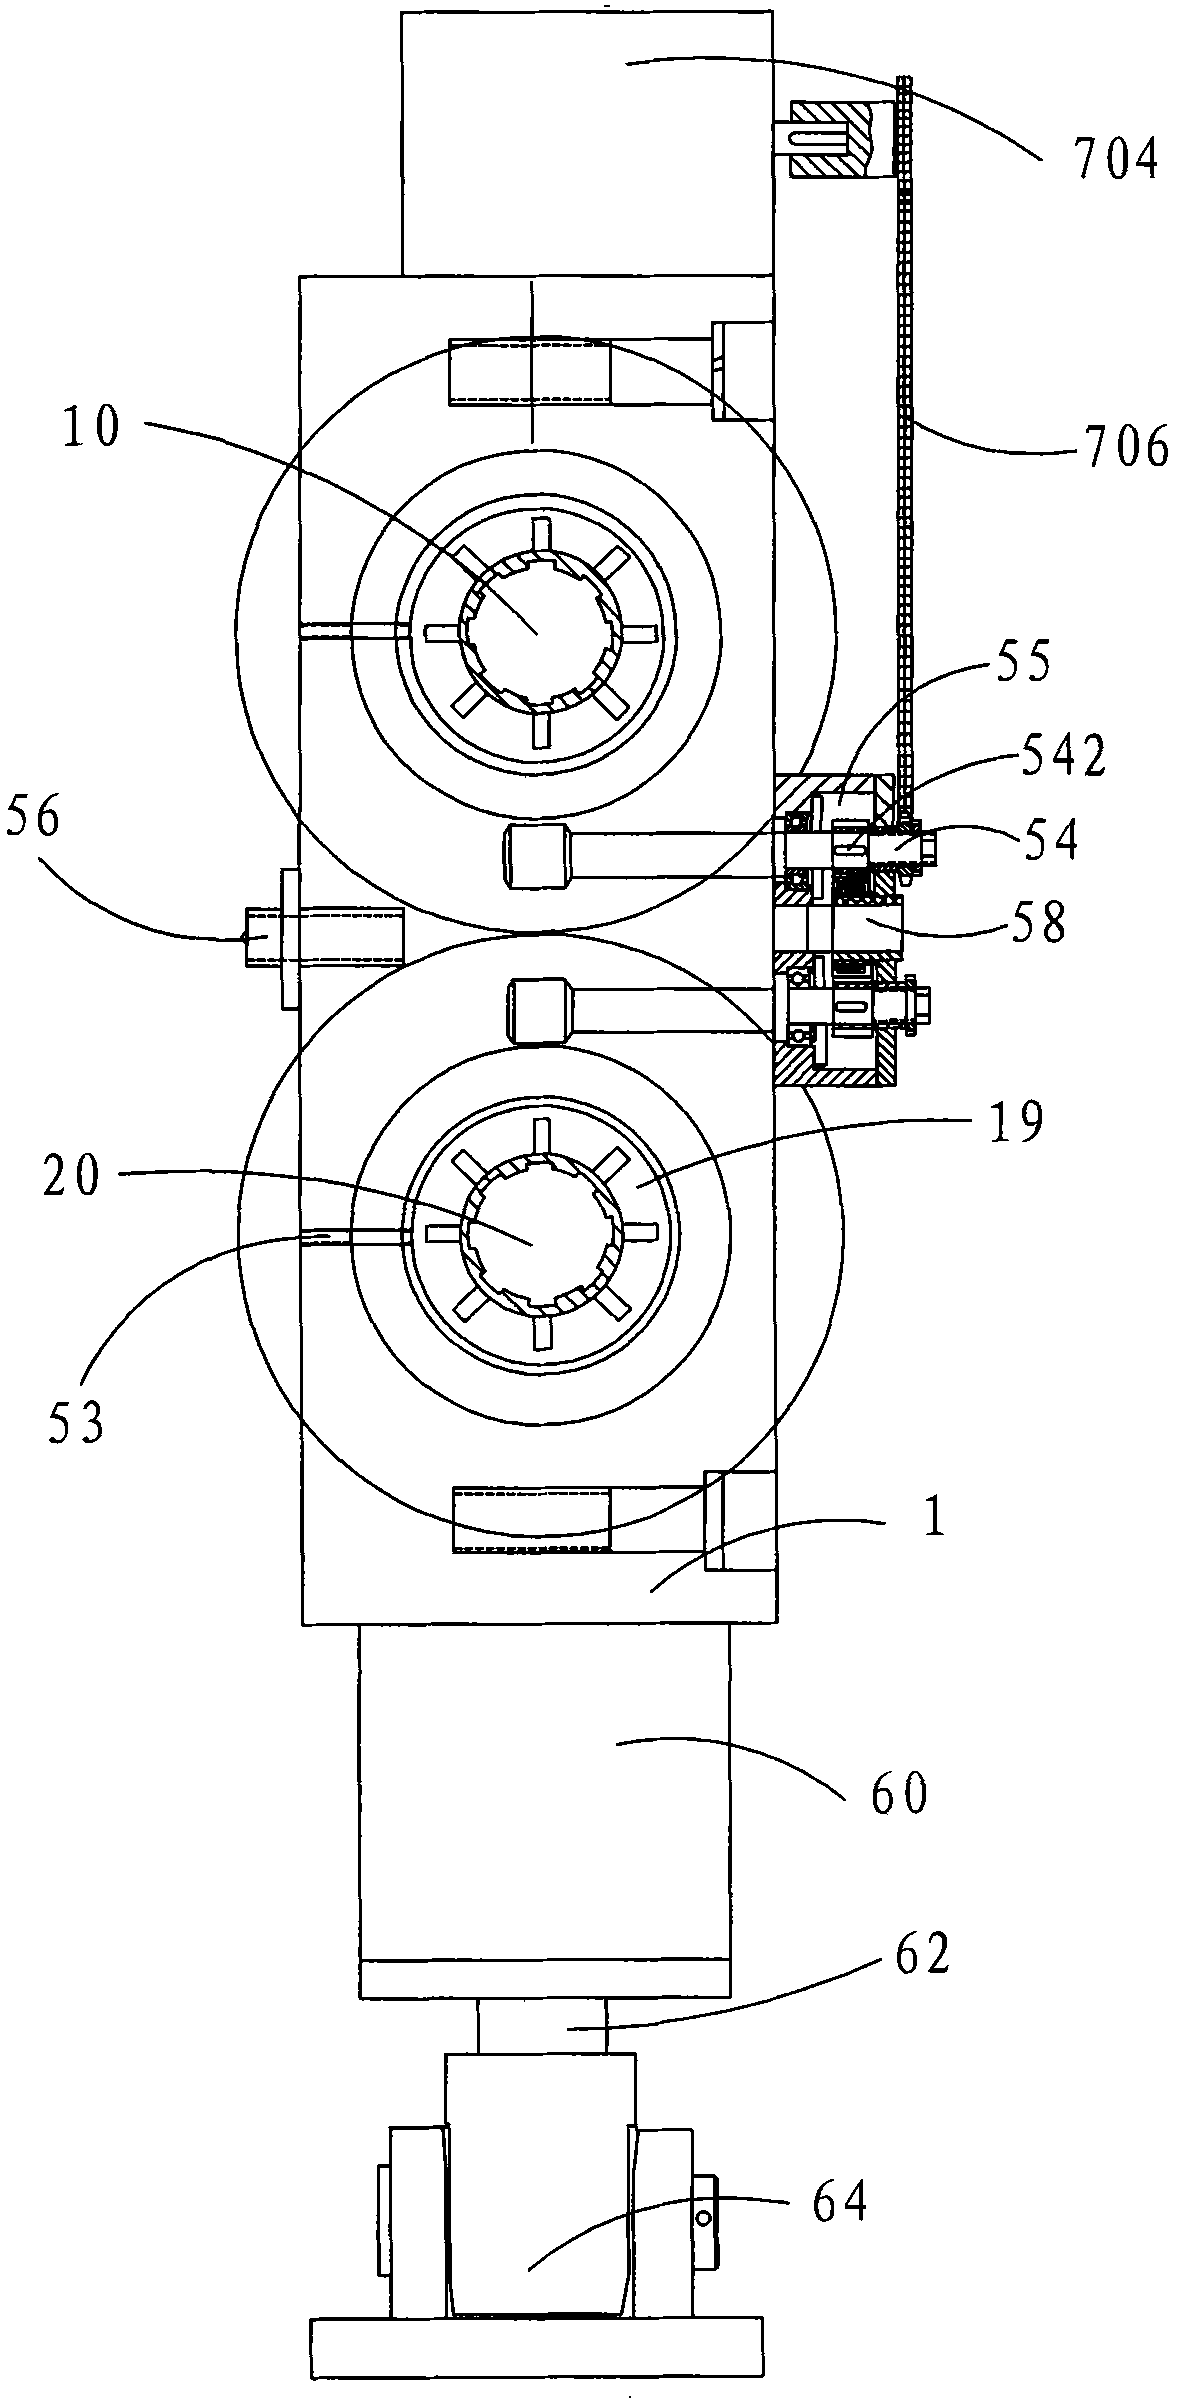 Two transmission shaft and four roller cross adjustable universal rolling mill and universal continuous rolling mill set formed by same